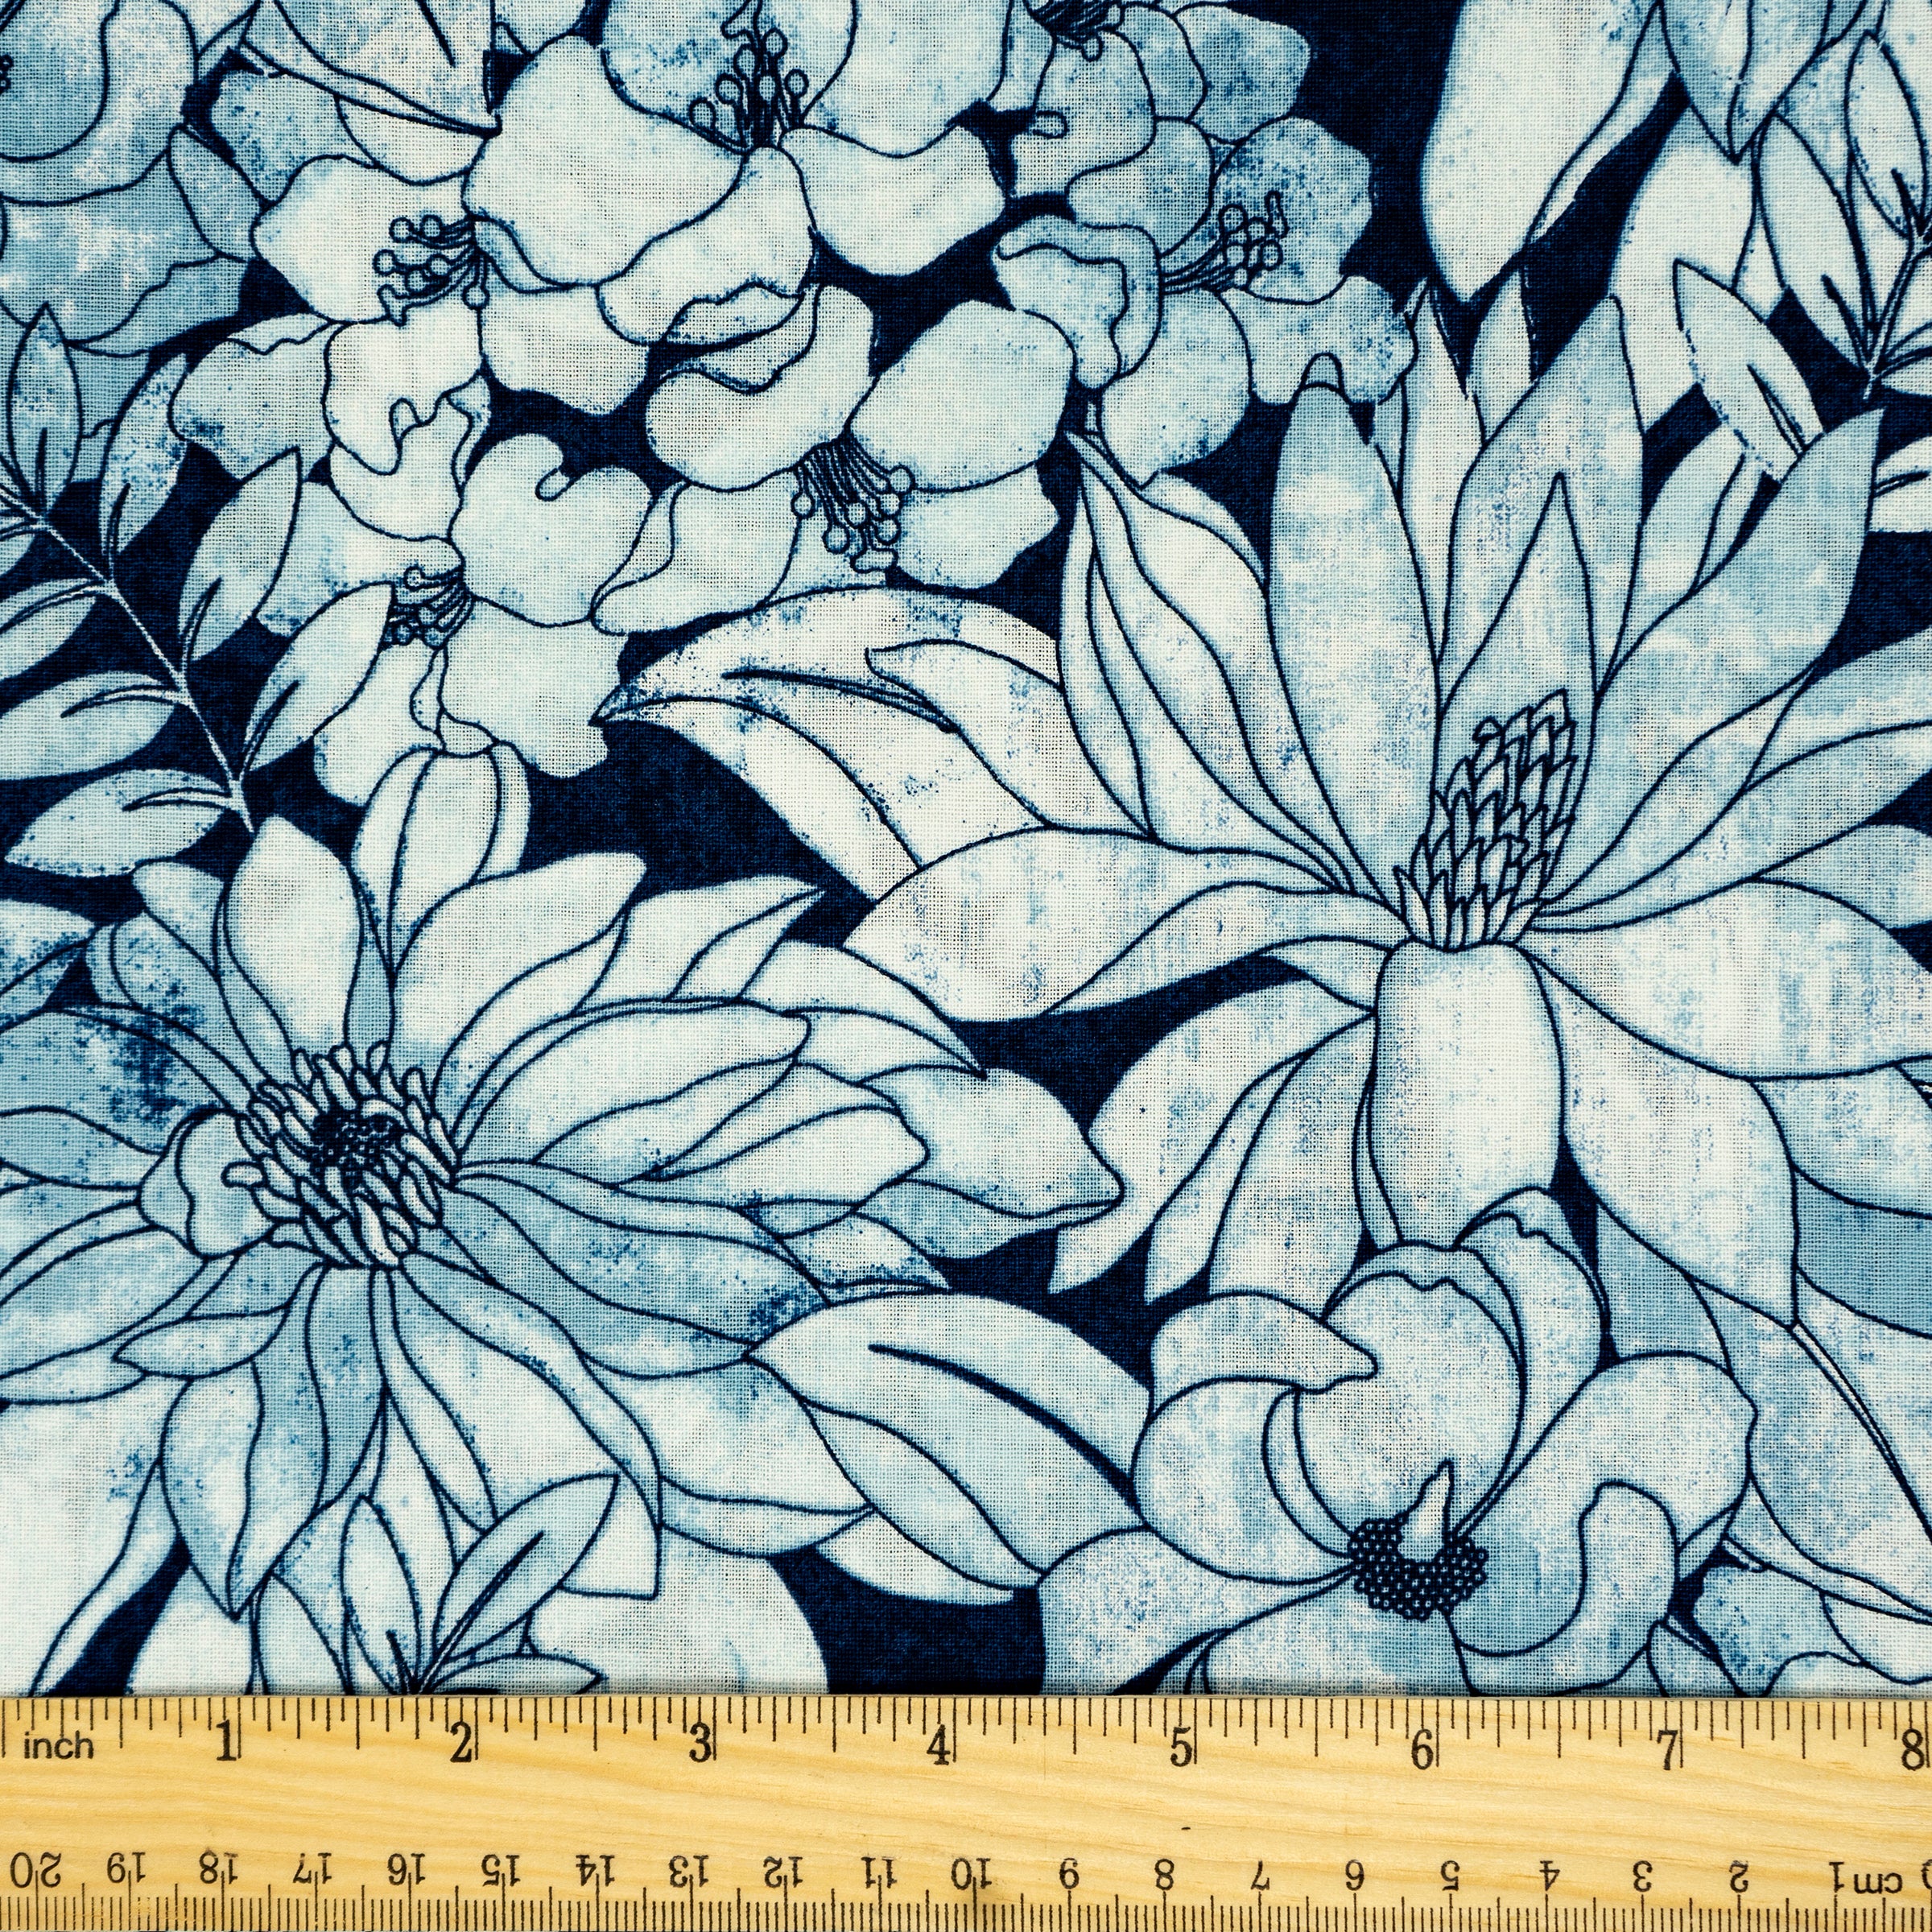 Waverly Inspirations 44" 100% Cotton Tea Garden Sewing & Craft Fabric By the Yard, Navy